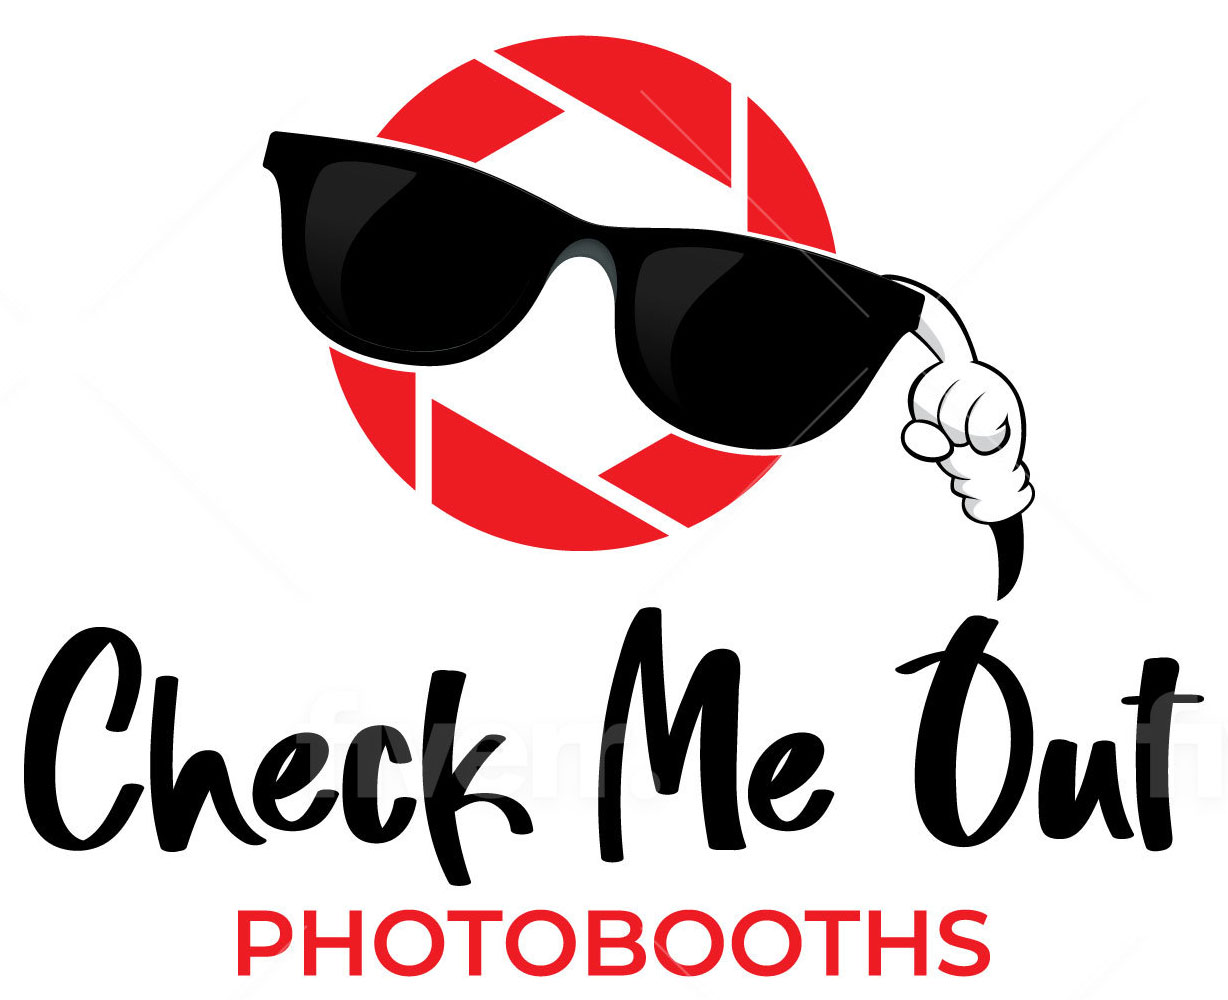 Check me out photo booths, LLC